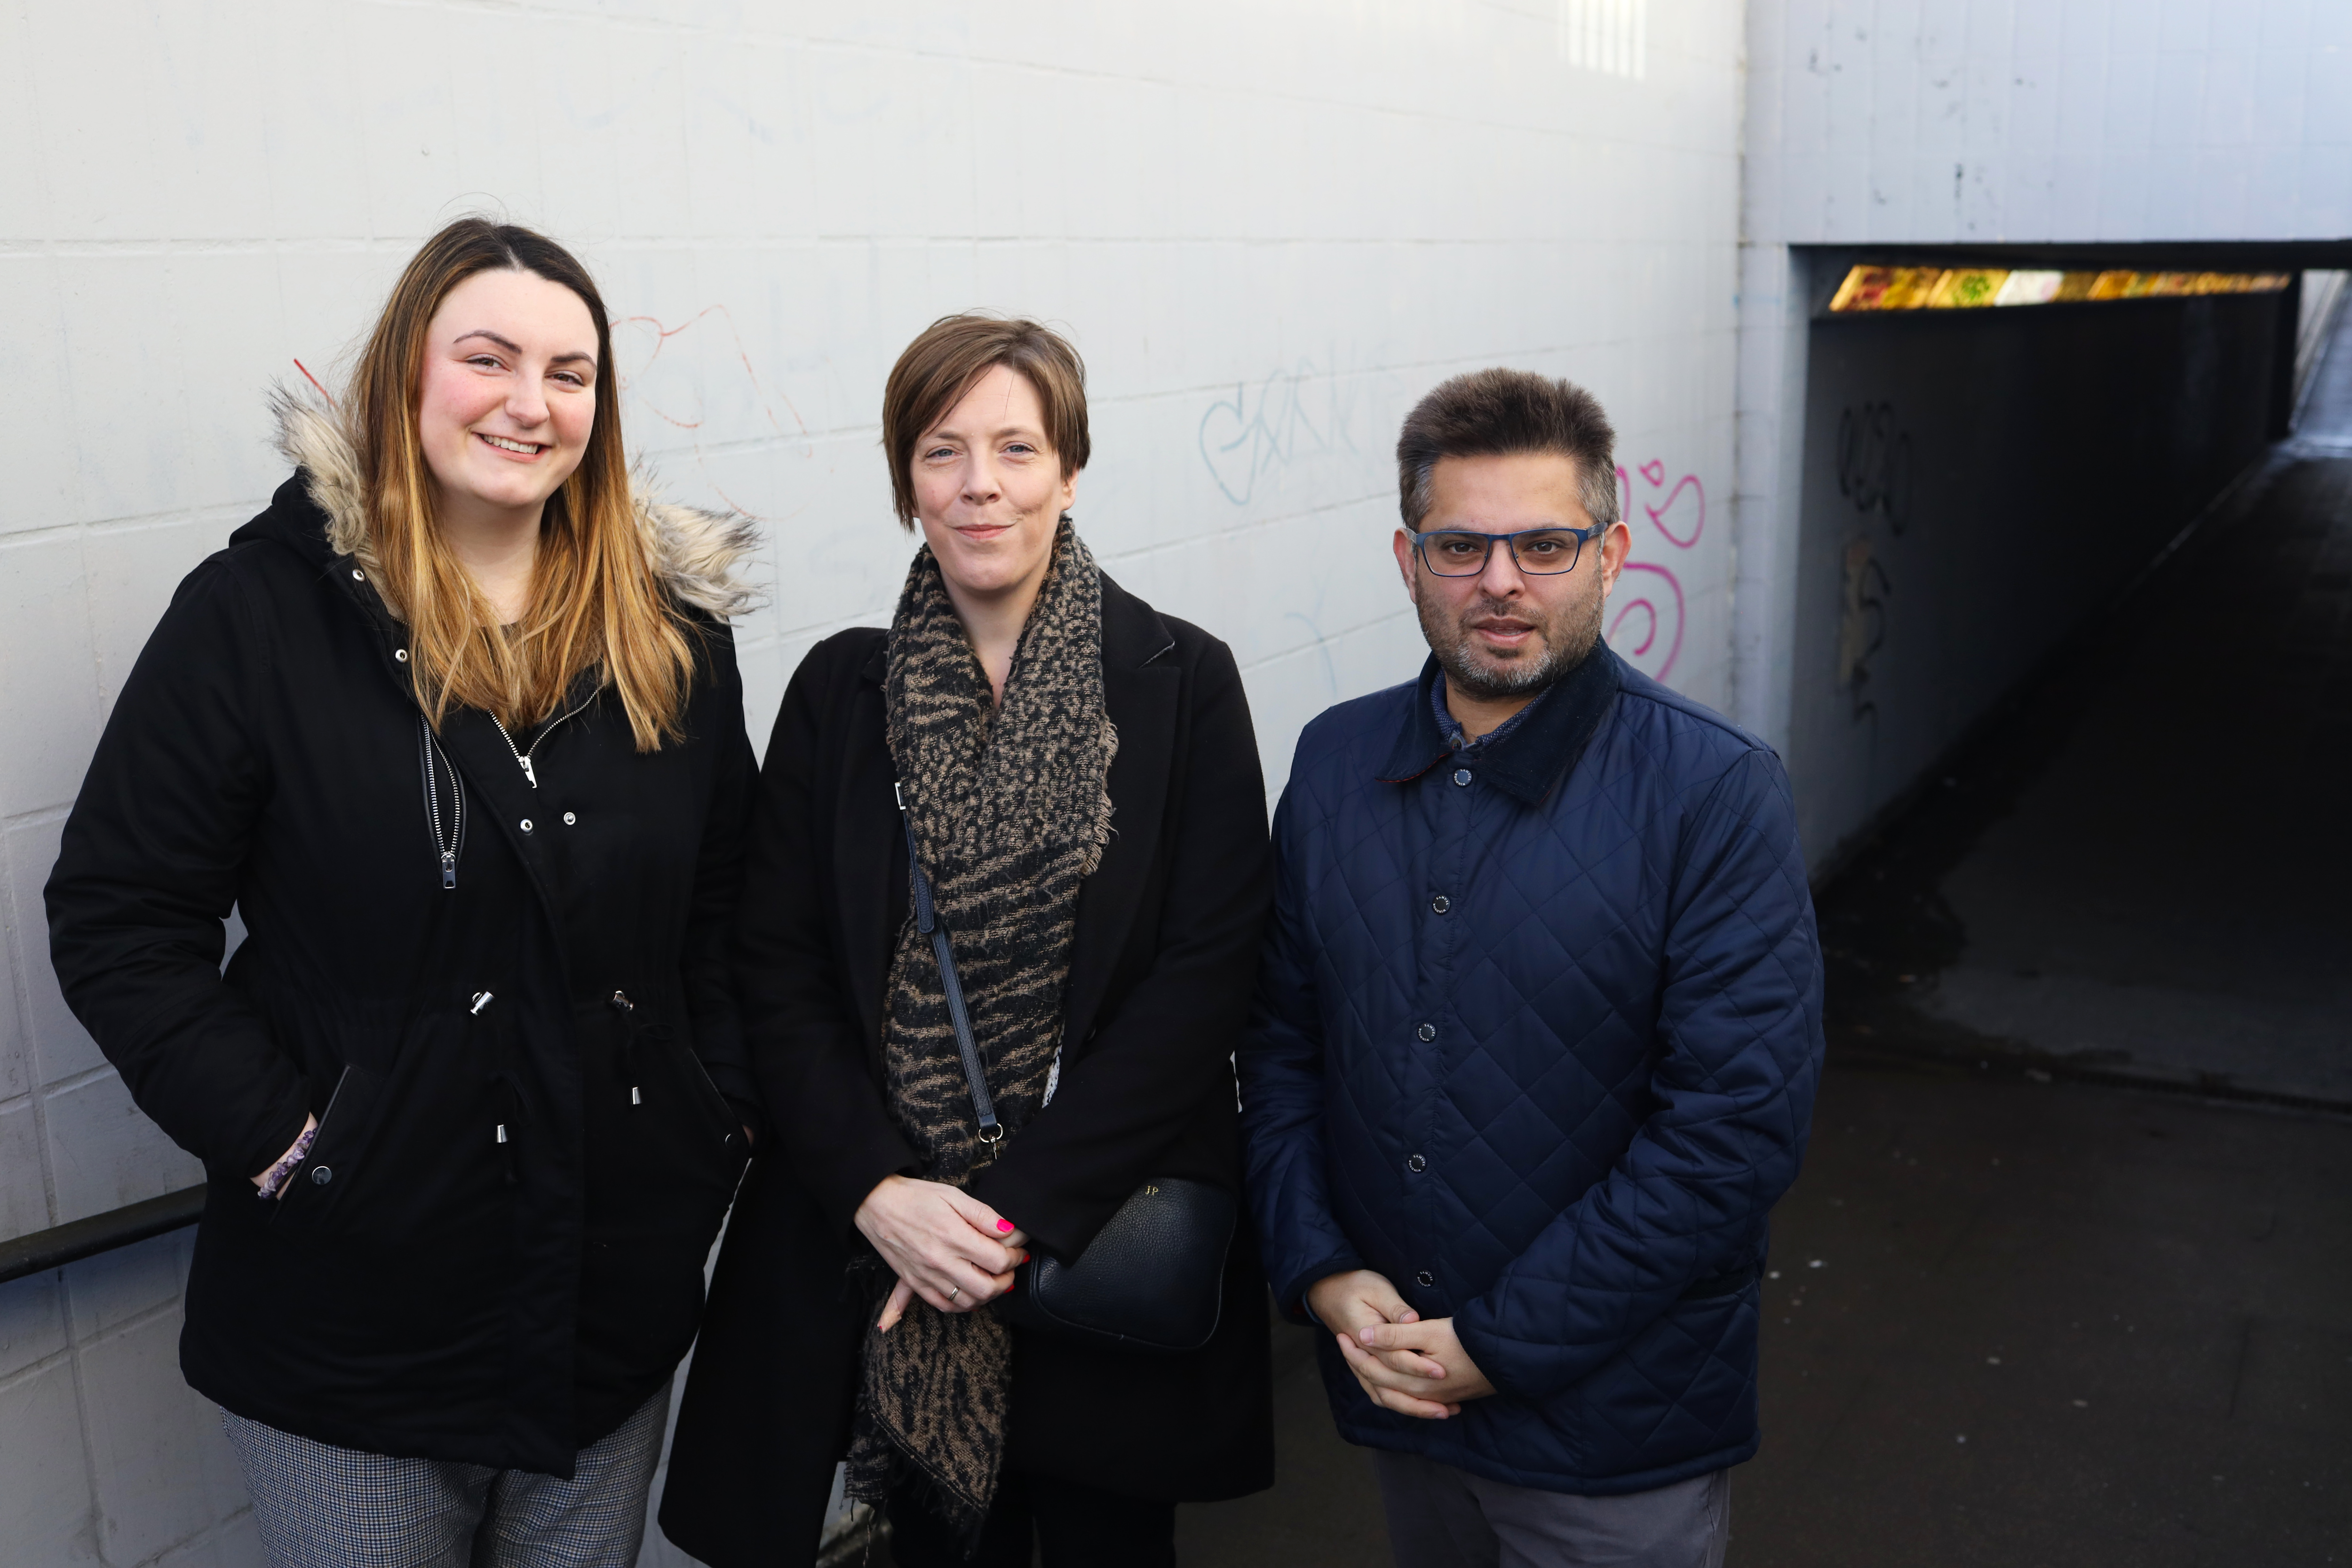 Councillor Zaffar and Jess Phillips were joined by Beth Farrington, a local resident who has campaigned for the closure of the underpass.